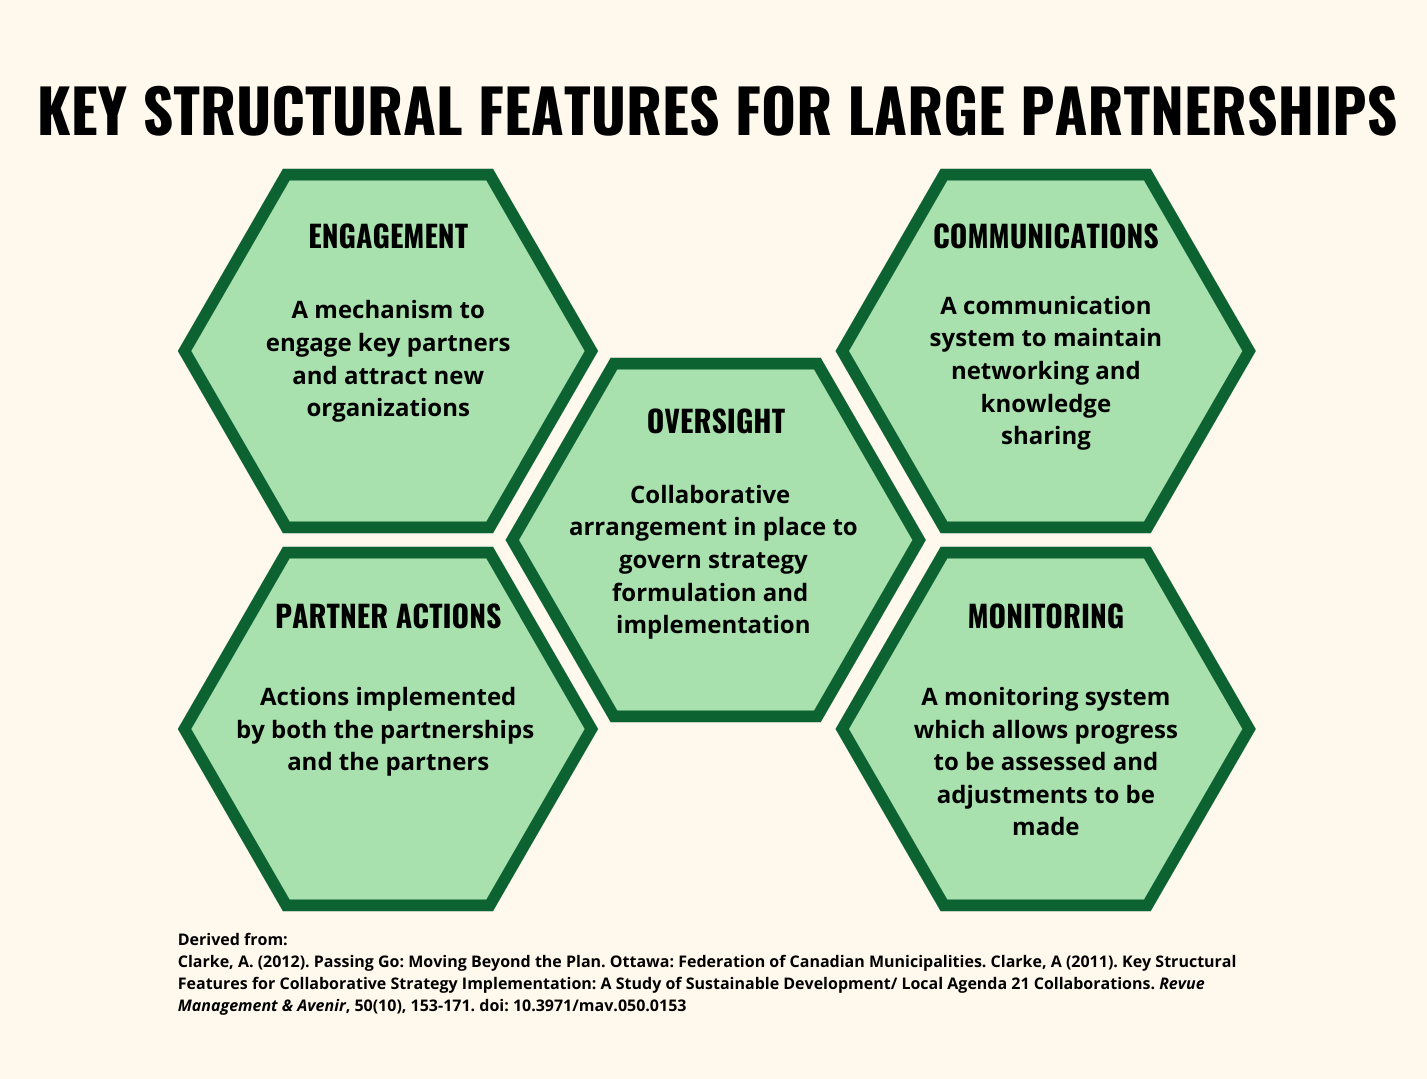 Key Structural Features for Large Partnerships